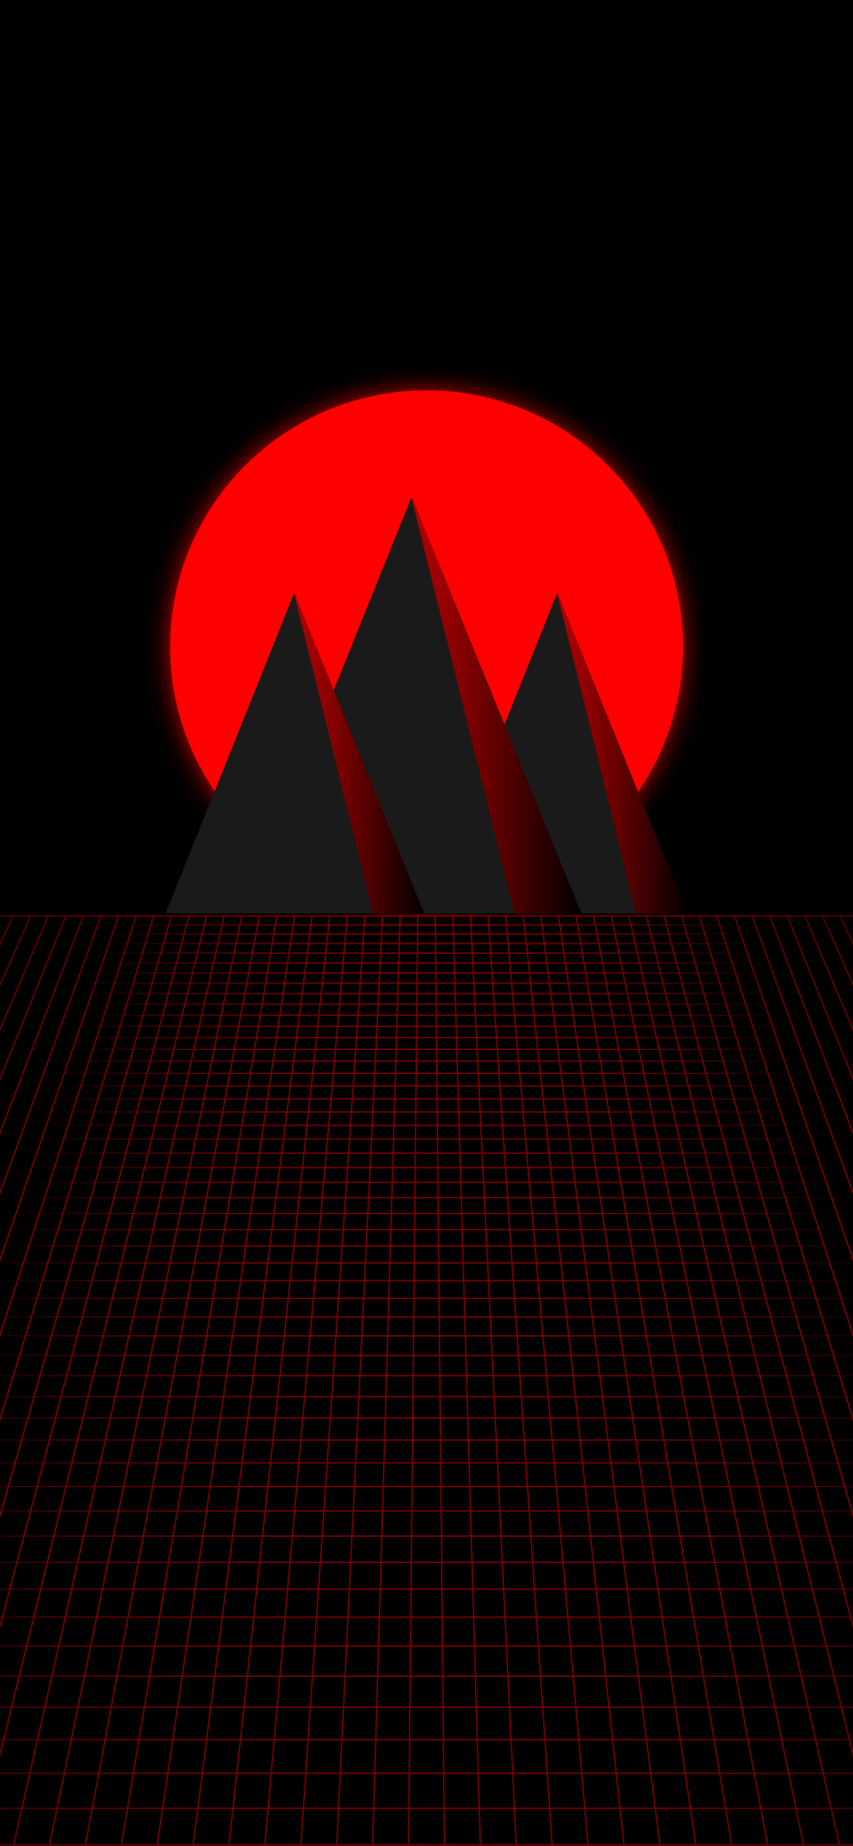 Red and Black Wallpapers free for iPhone